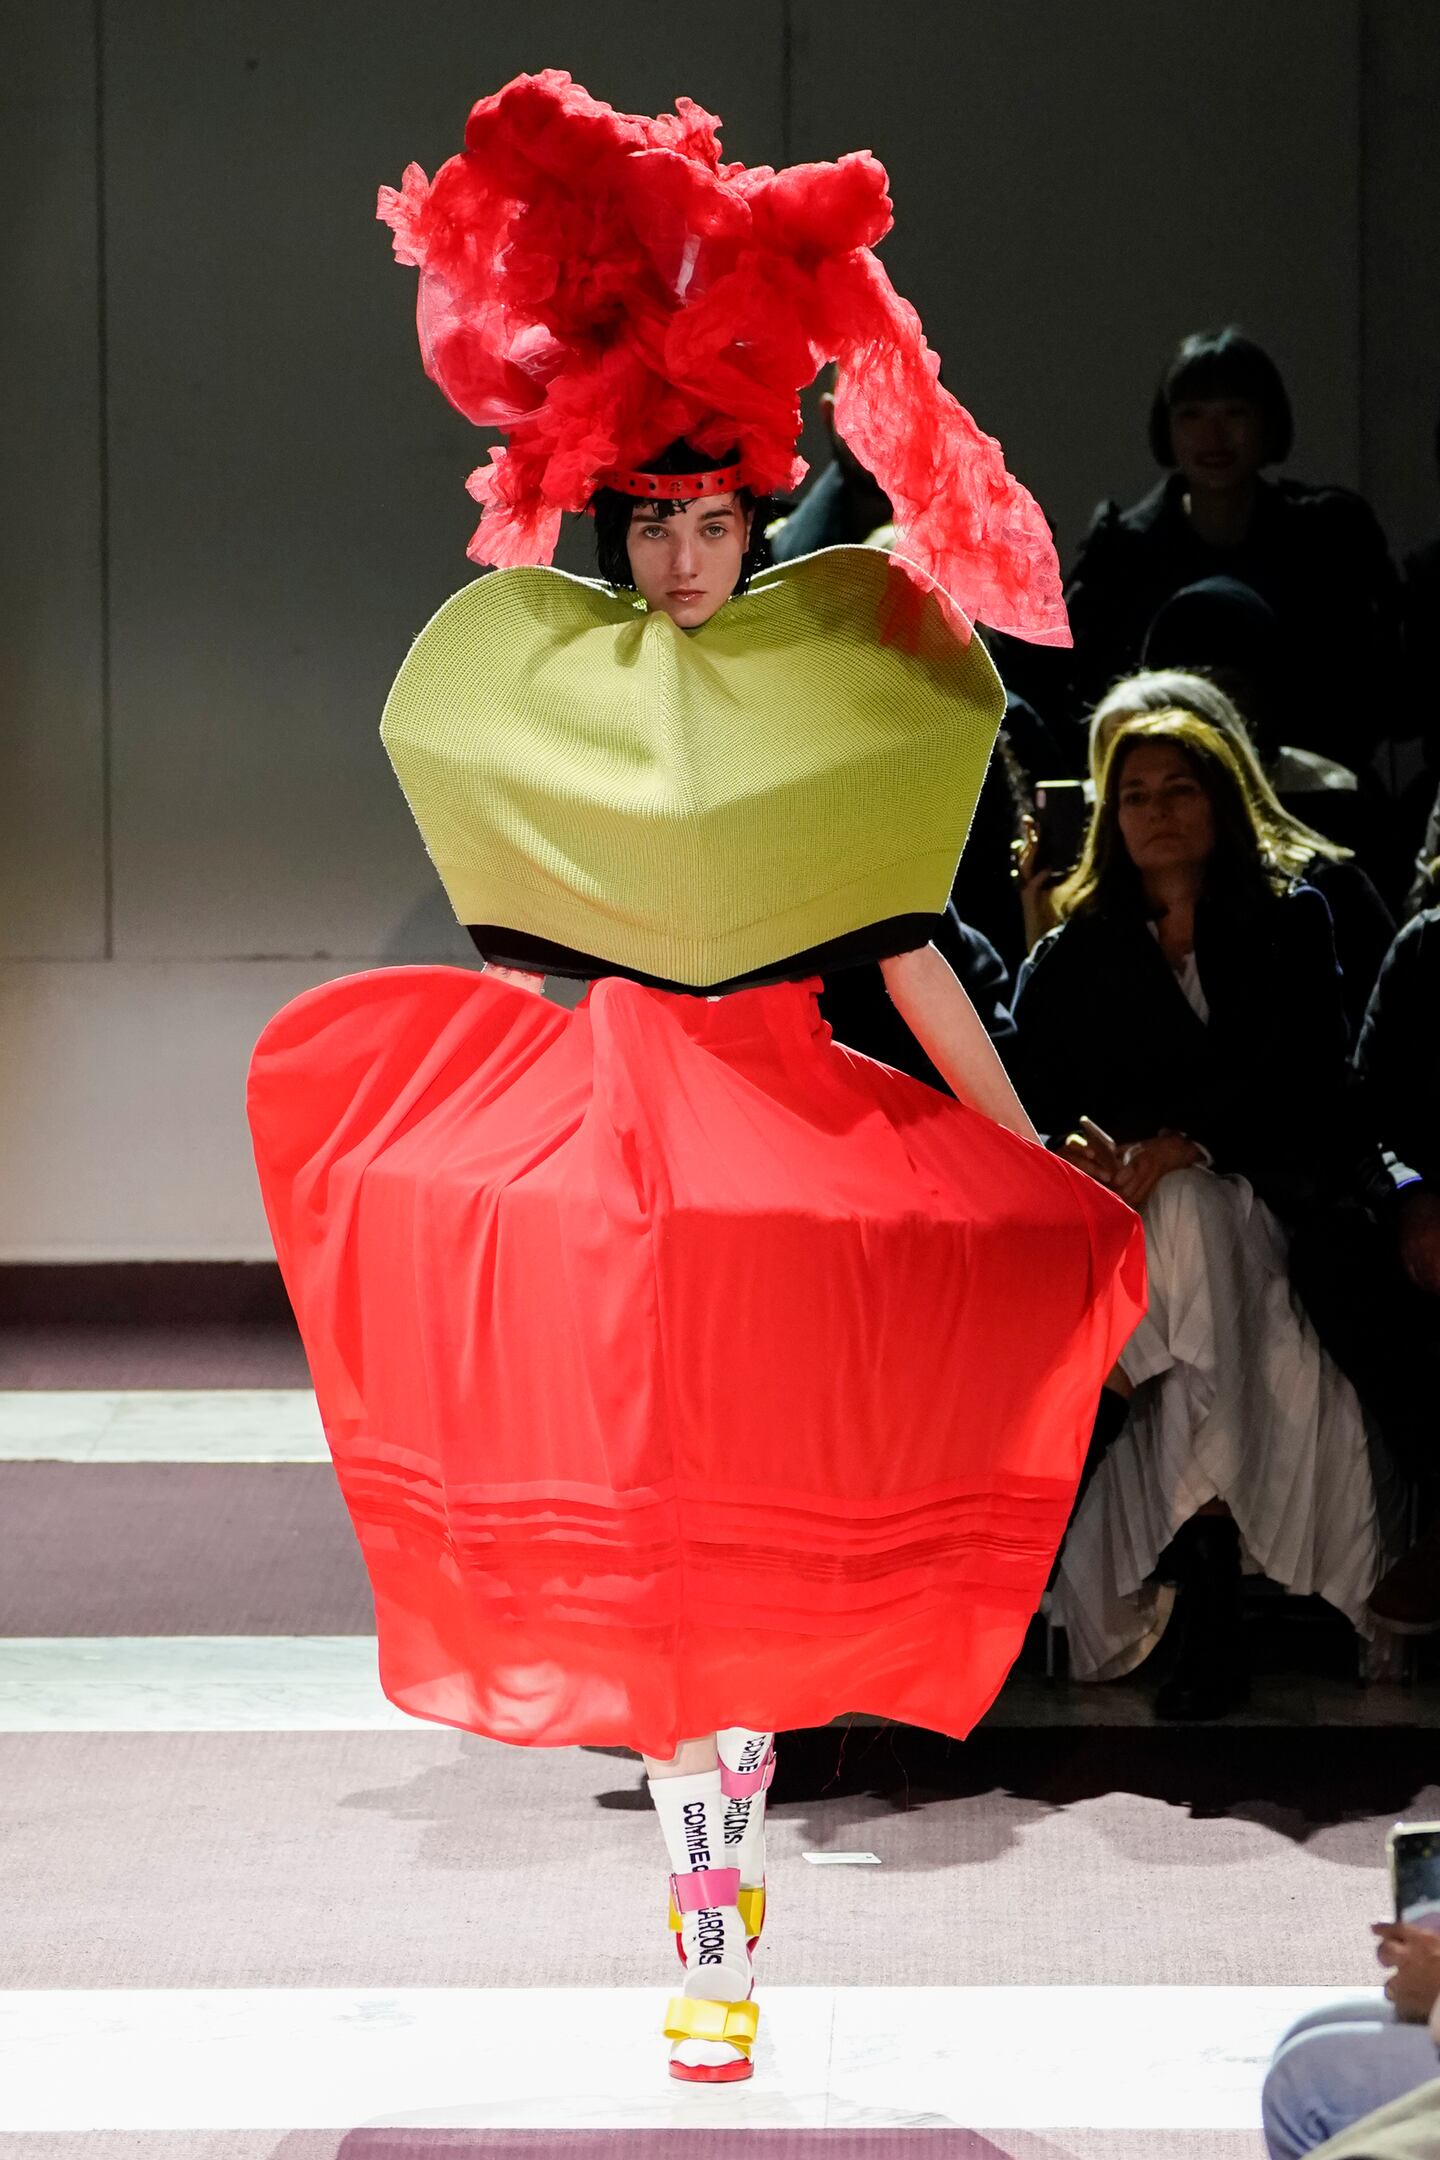 PARIS, FRANCE - FEBRUARY 29: (EDITORIAL USE ONLY) A model walks the runway during the Comme Des Garcons as part of the Paris Fashion Week Womenswear Fall/Winter 2020/2021 on February 29, 2020 in Paris, France. (Photo by Peter White/Getty Images)